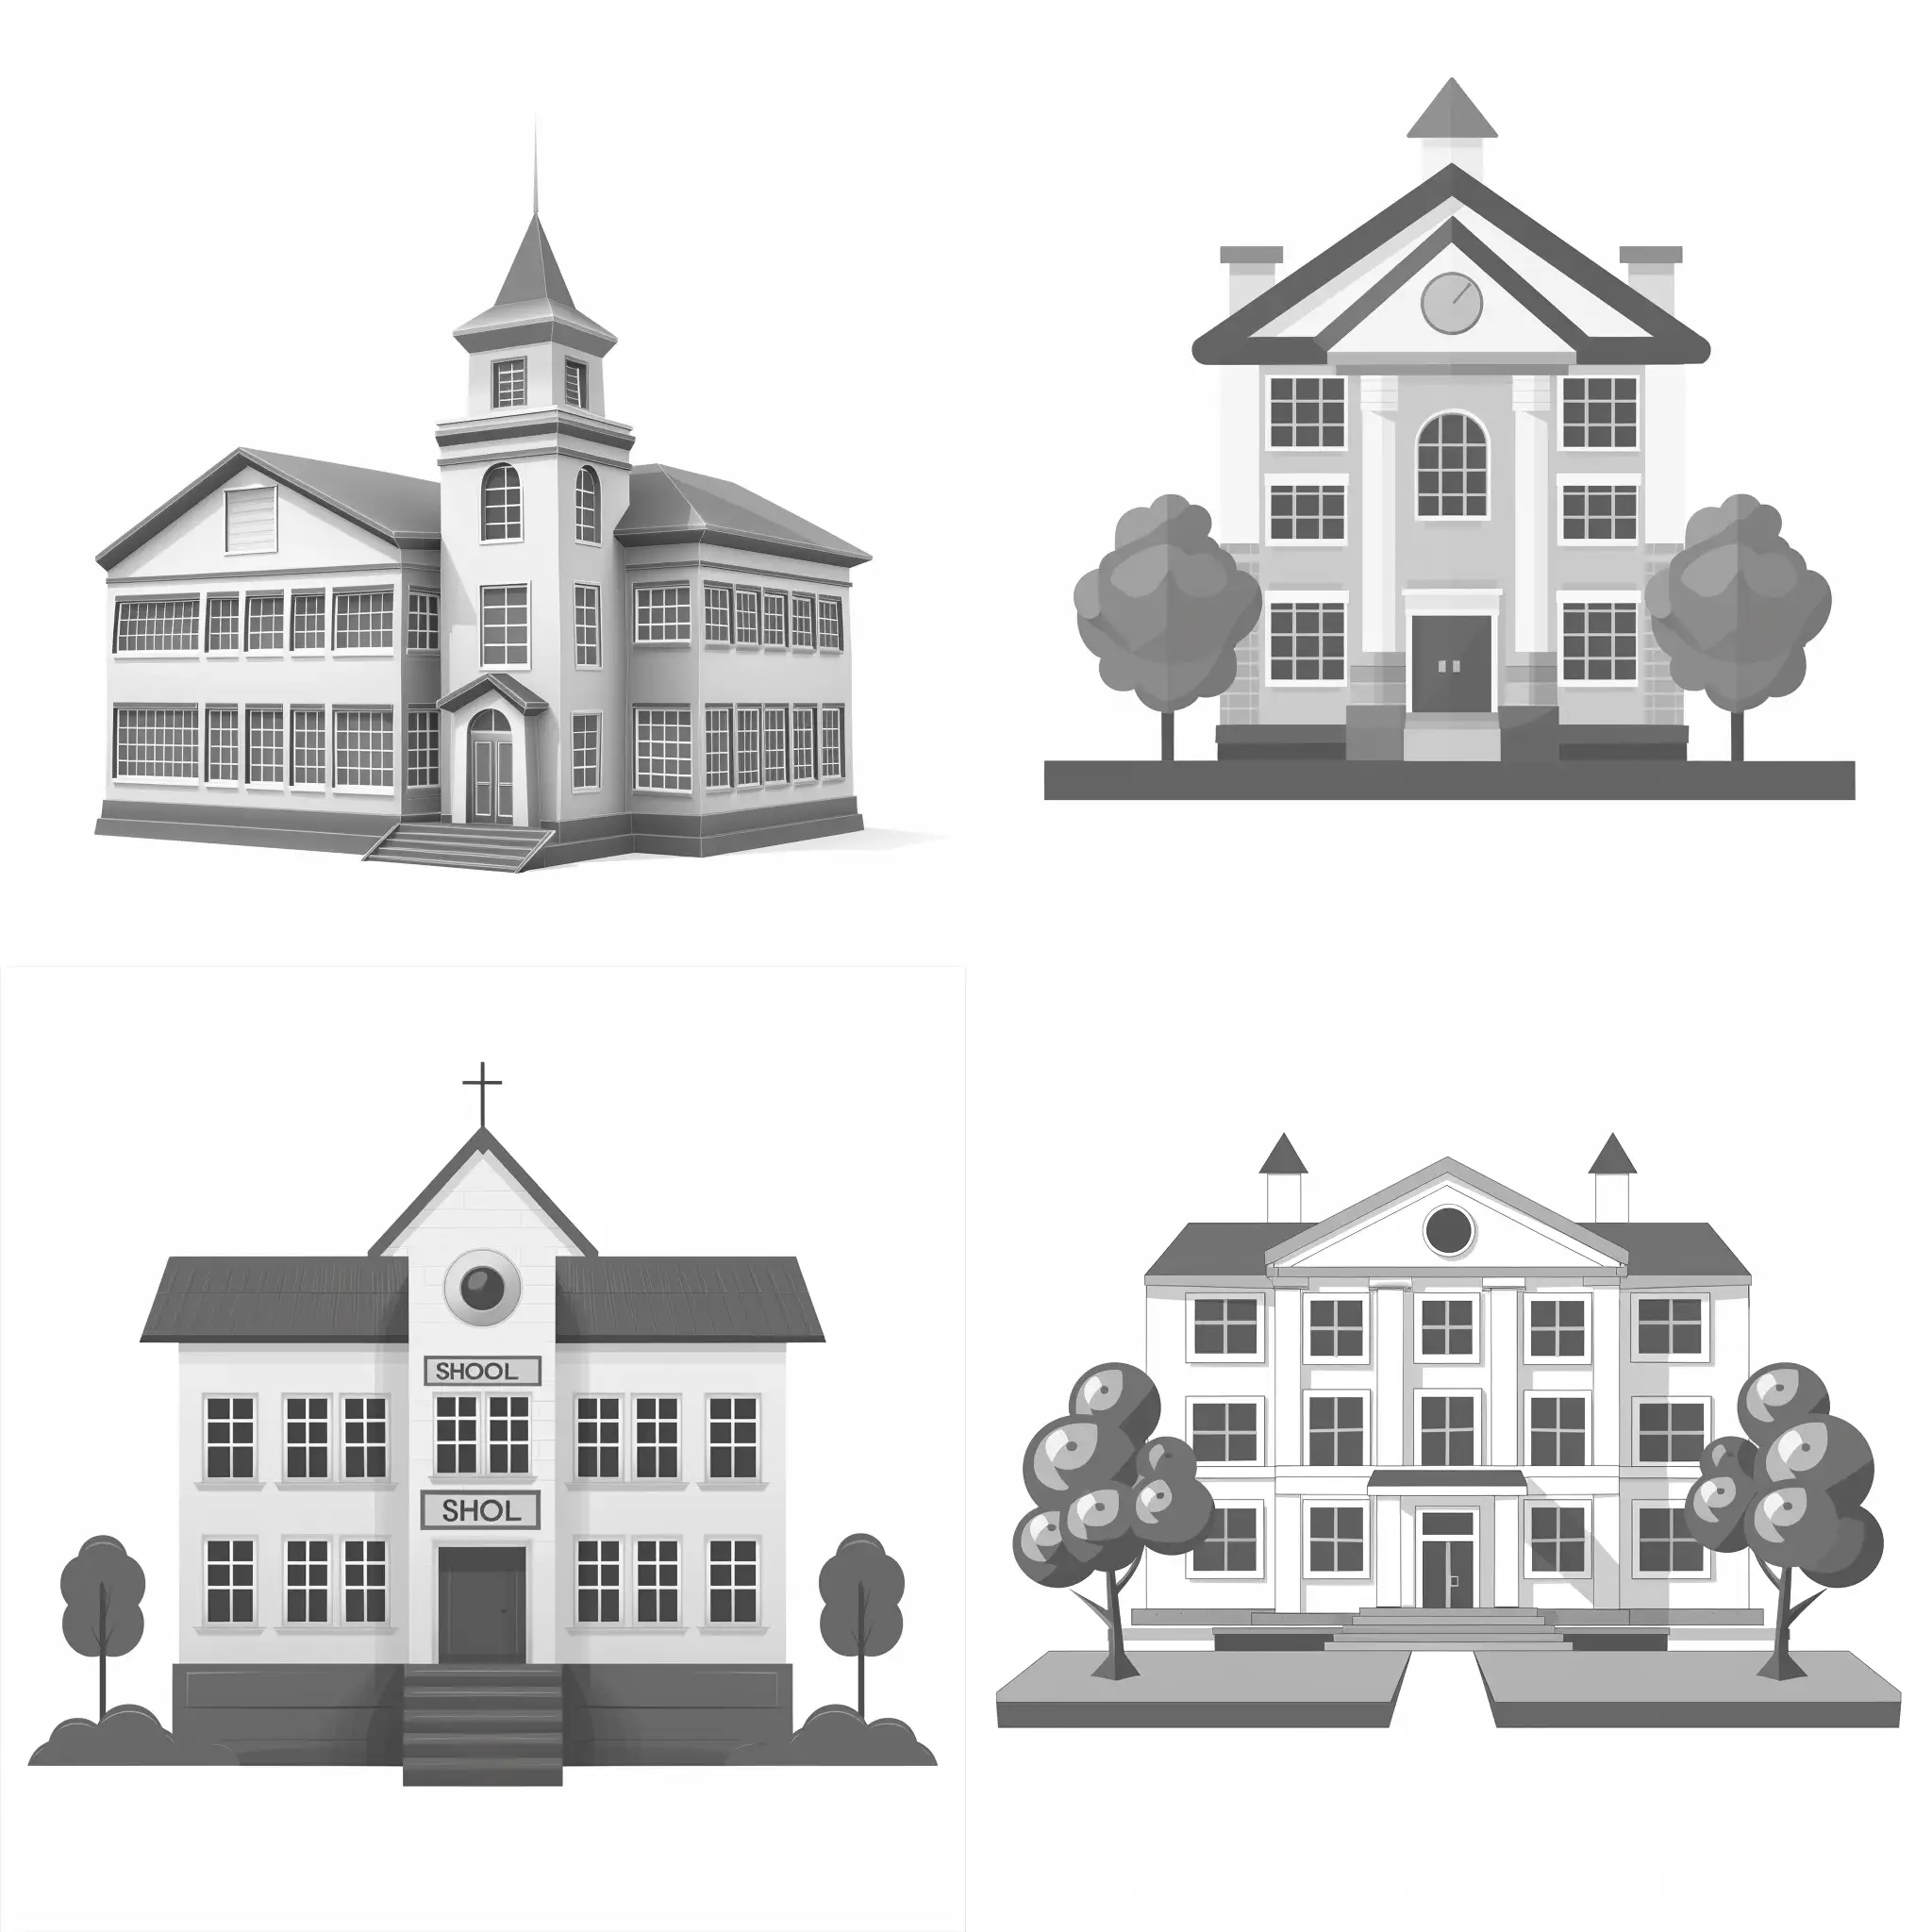 Please generate me picture of "school building" in SVG format. Picture must have only two colors only gray and white. Picture must be primitive, minimal vertex. Size must be 180x120px and inset padding 20px